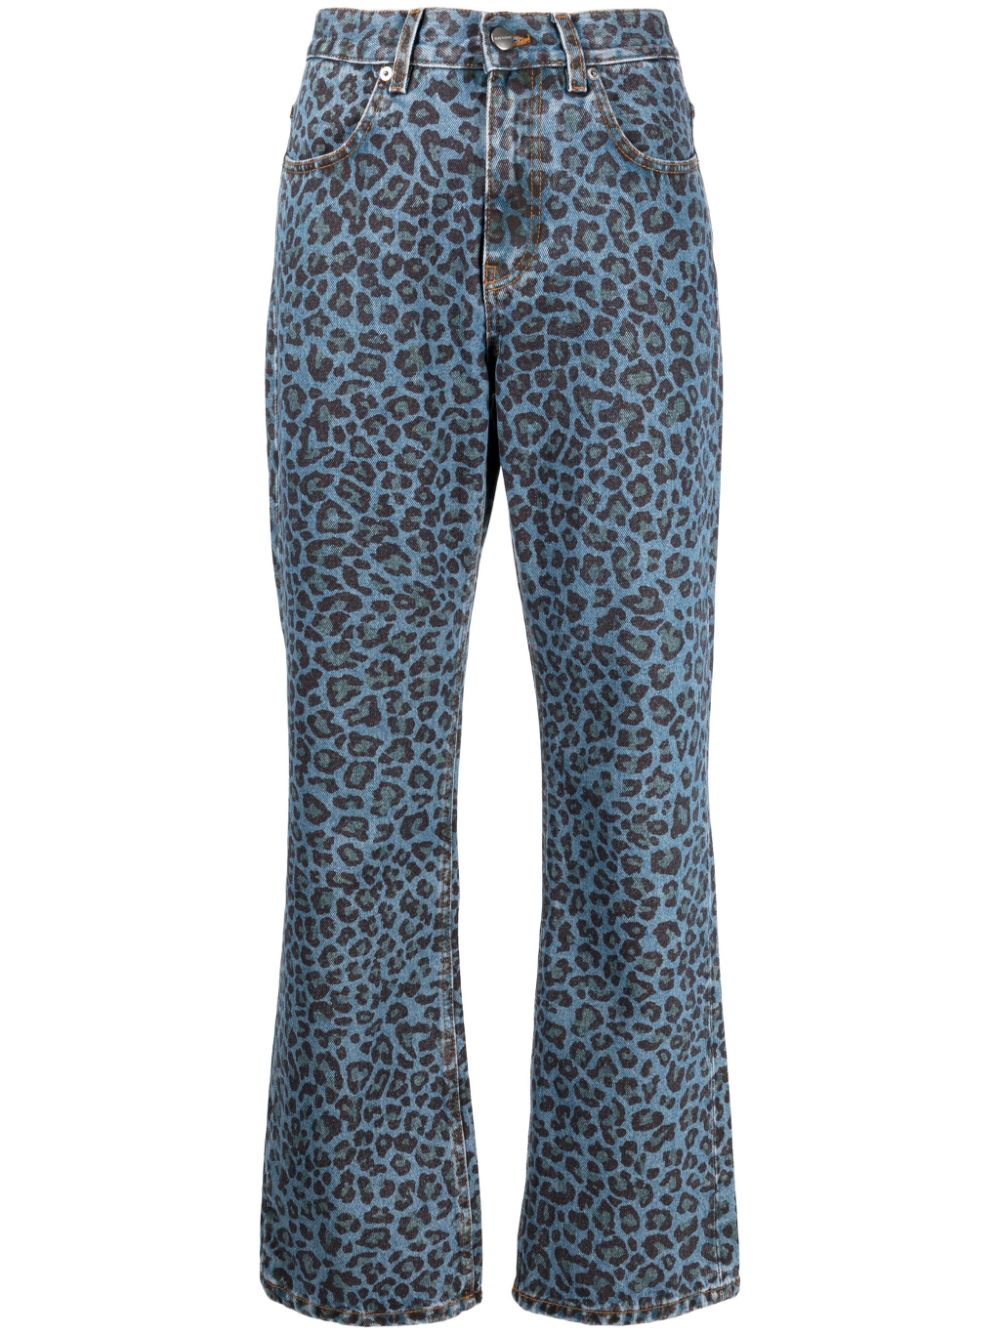 Image 1 of Molly Goddard leopard-print flared jeans